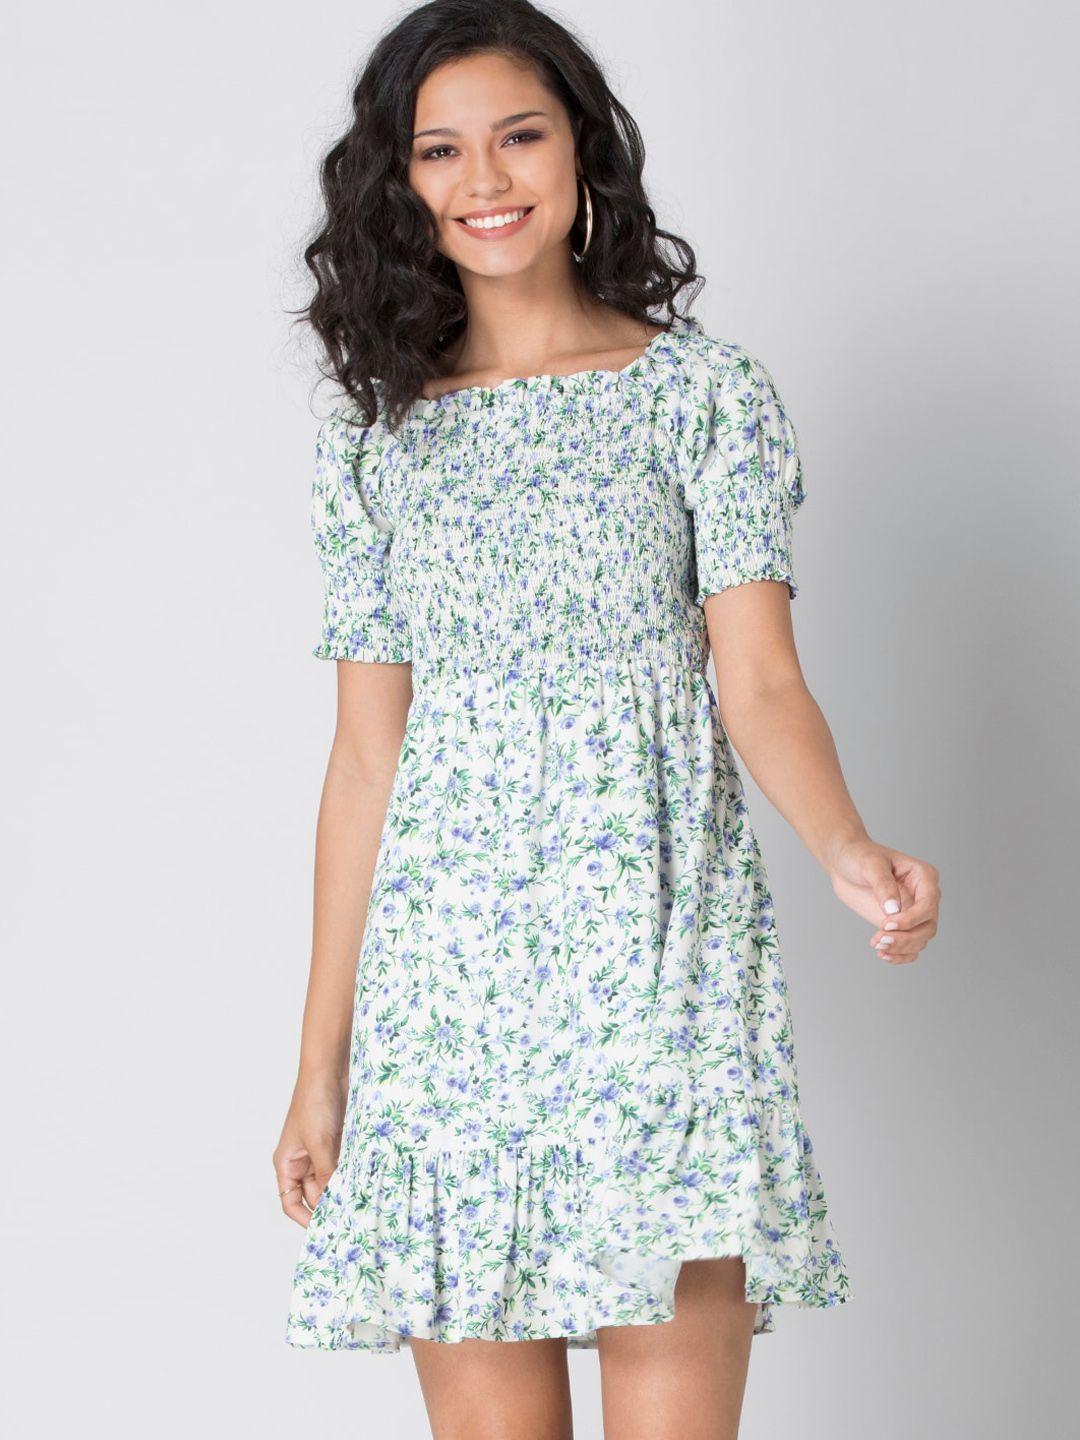 faballey-white-&-green-floral-printed-smocked-georgette-dress